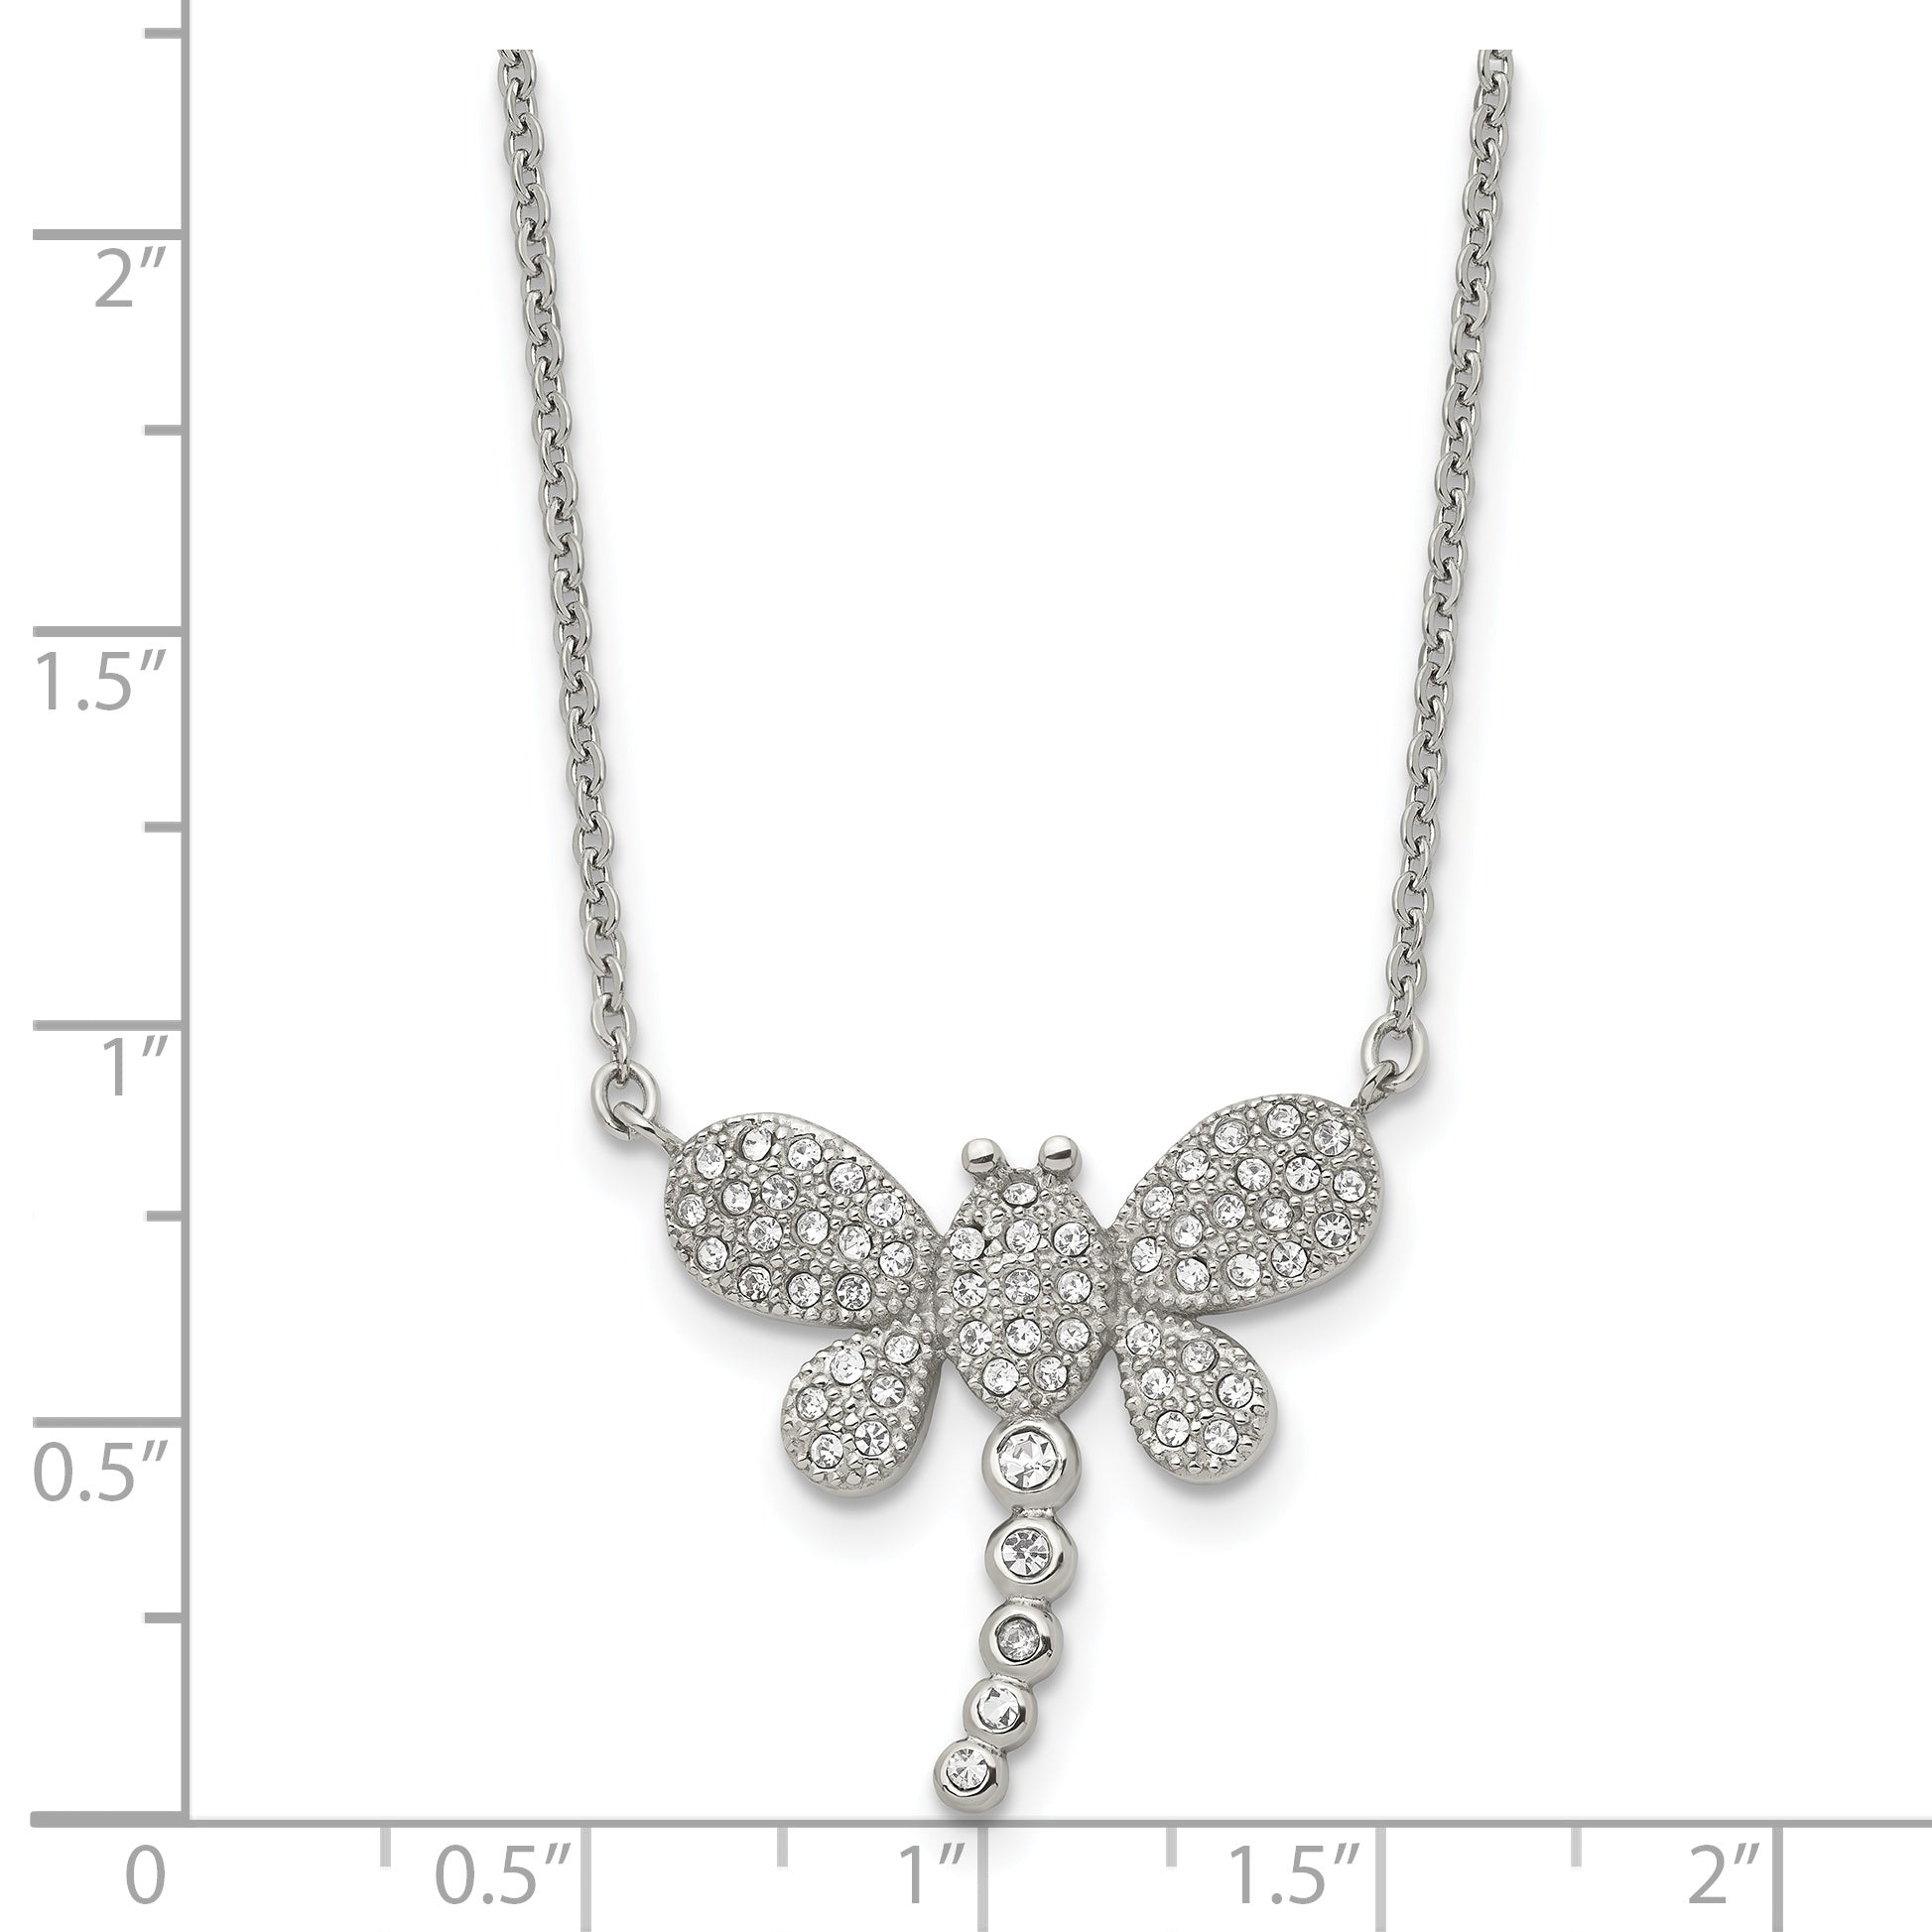 Stainless Steel Polished w/Preciosa Crystal Dragonfly w/2in ext Necklace